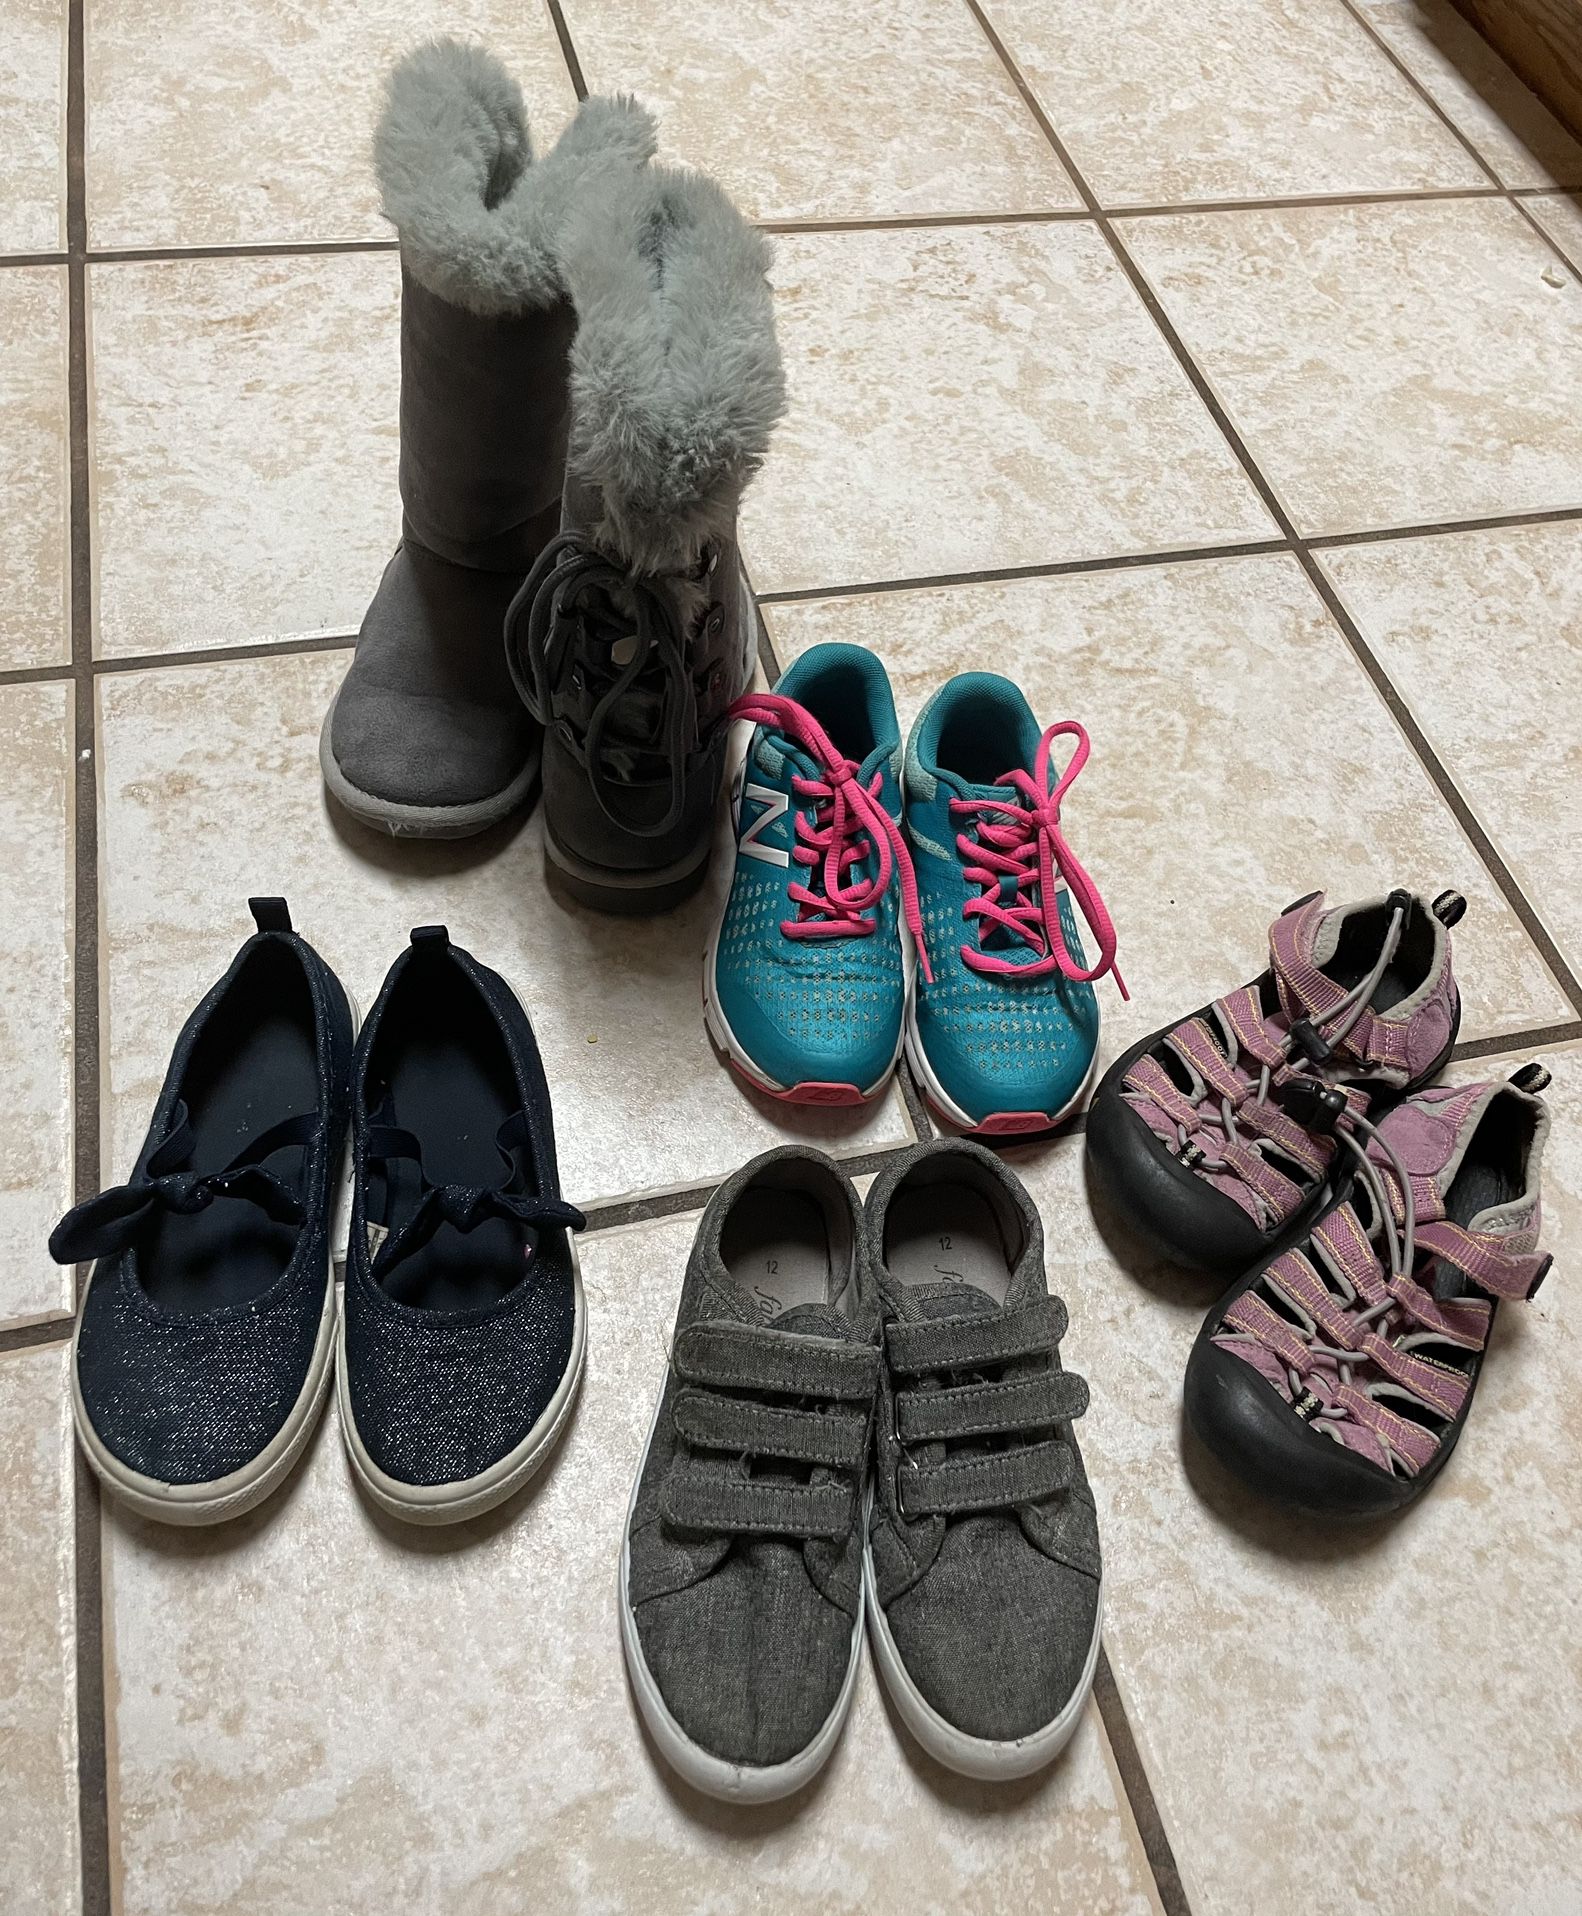 Various Boy’s and Girl’s Shoes Sizes 12 and 13 boots, slip-on, sneakers, tennis shoes, athletic